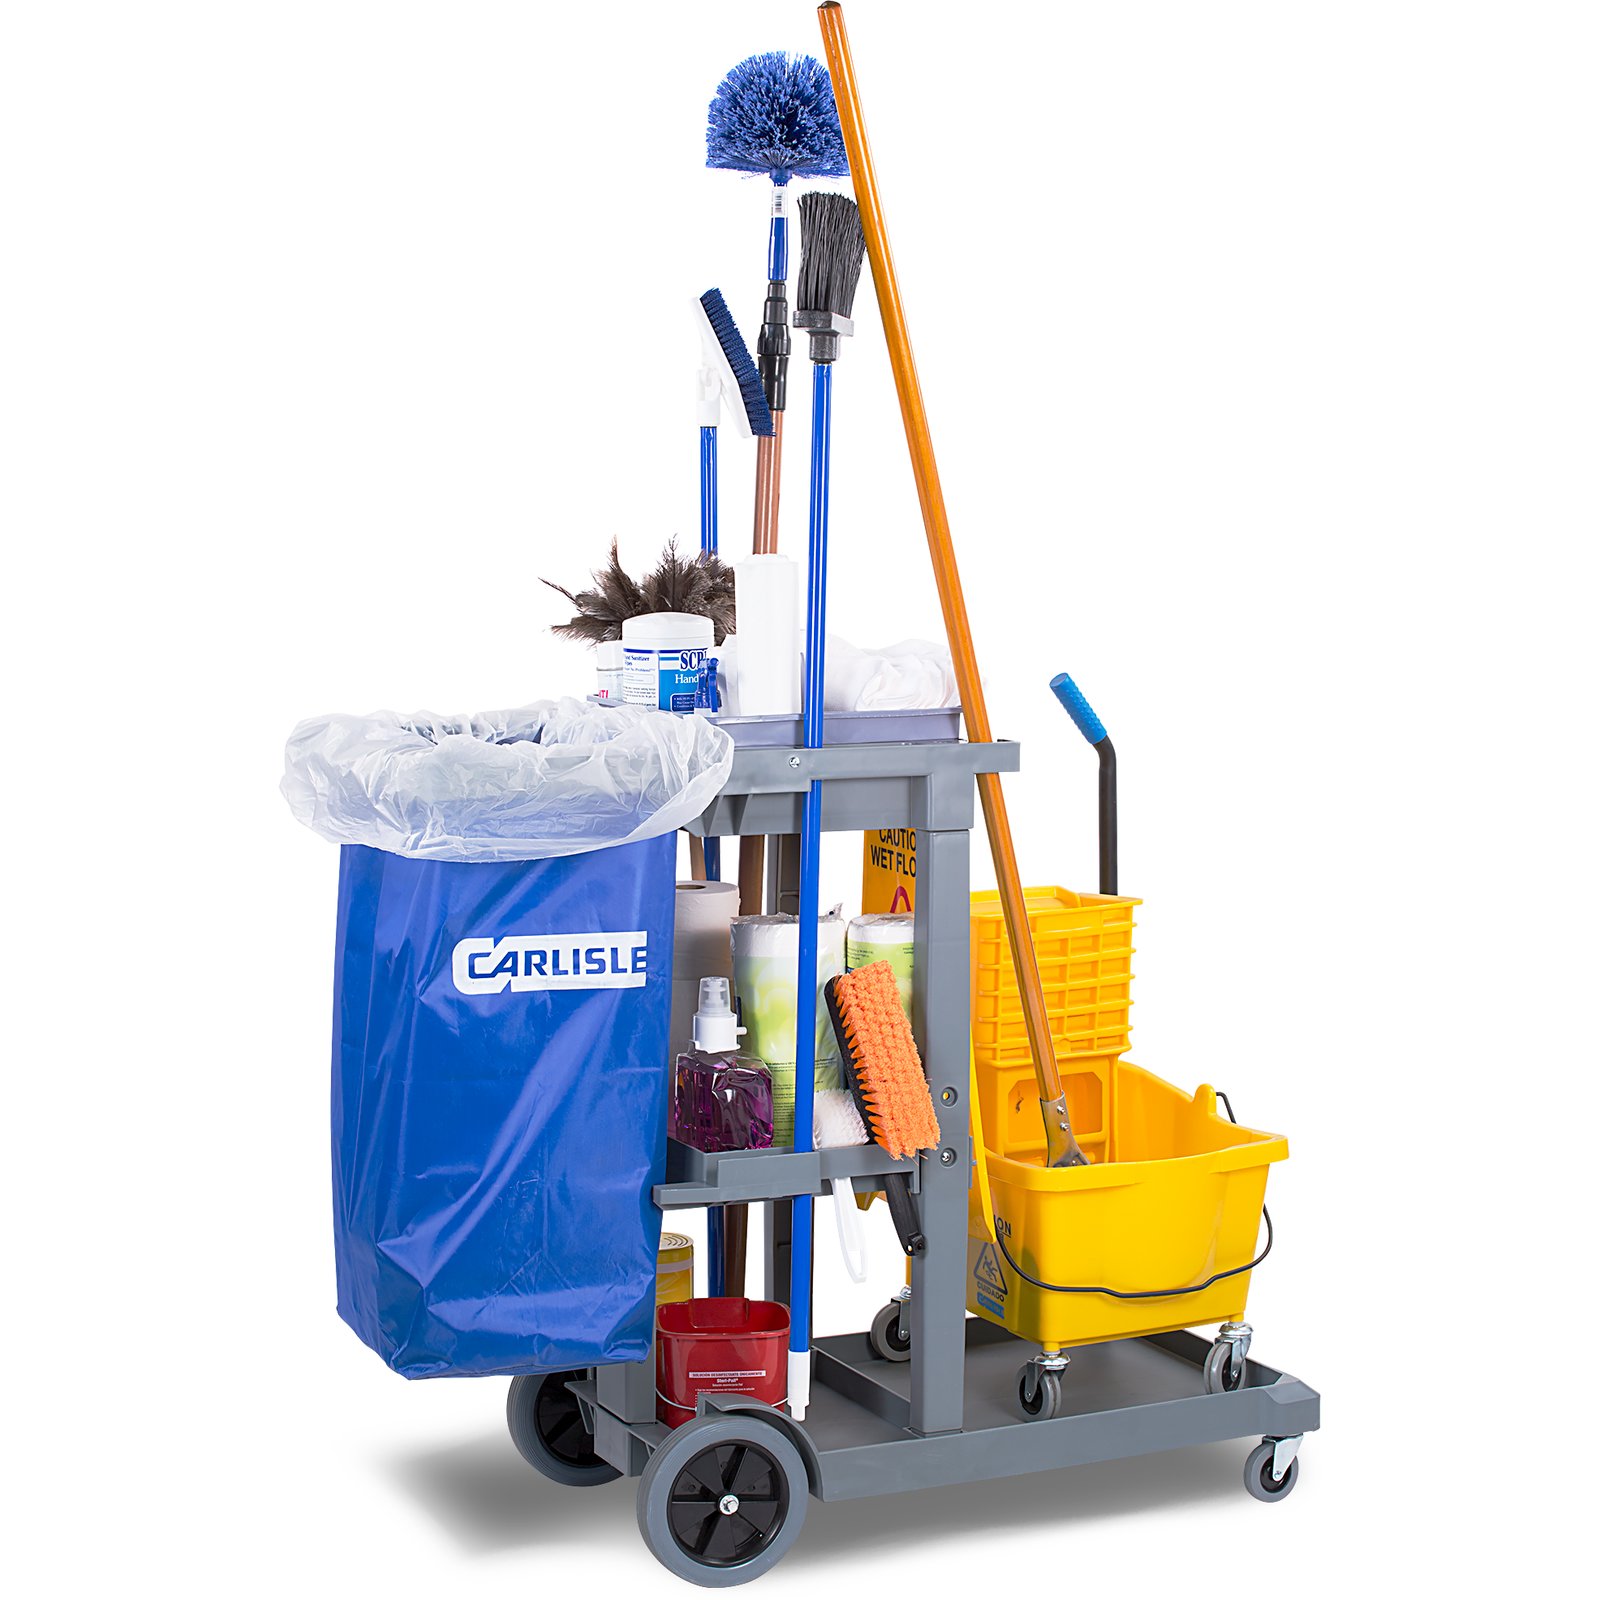 SSS® Janitor Cart - Grey  Empire Janitorial Supply Co